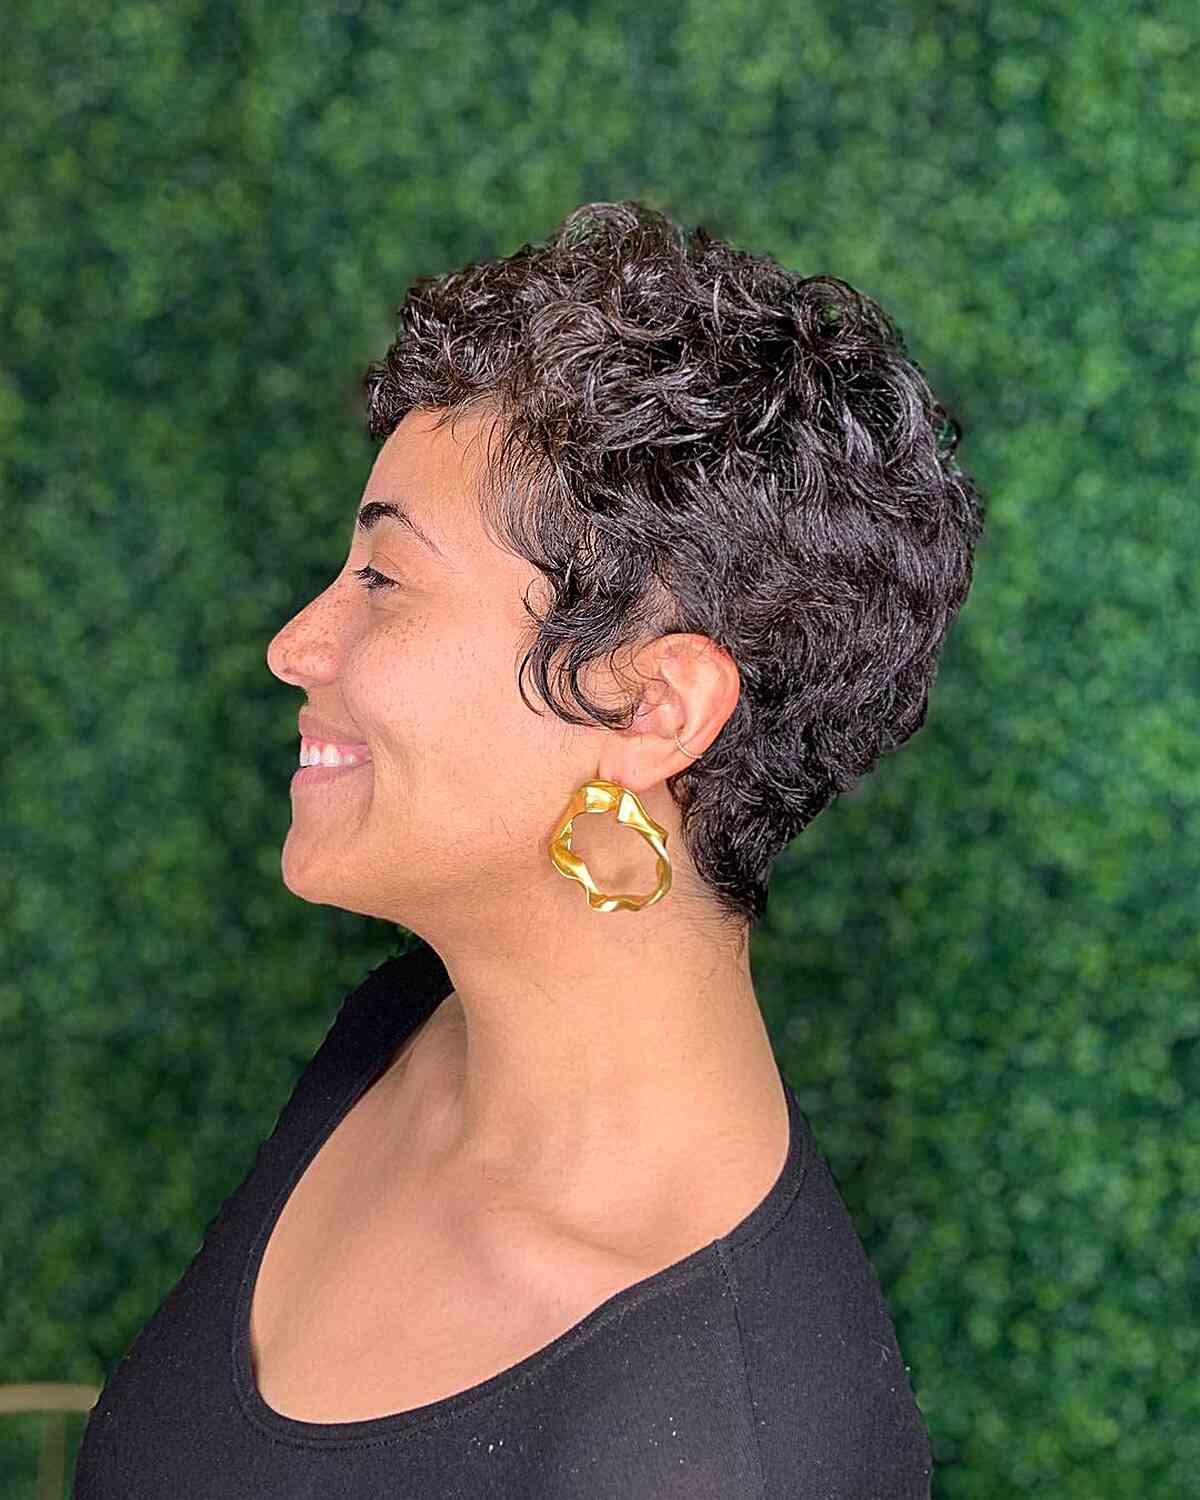 The Curly Long Pixie Cut